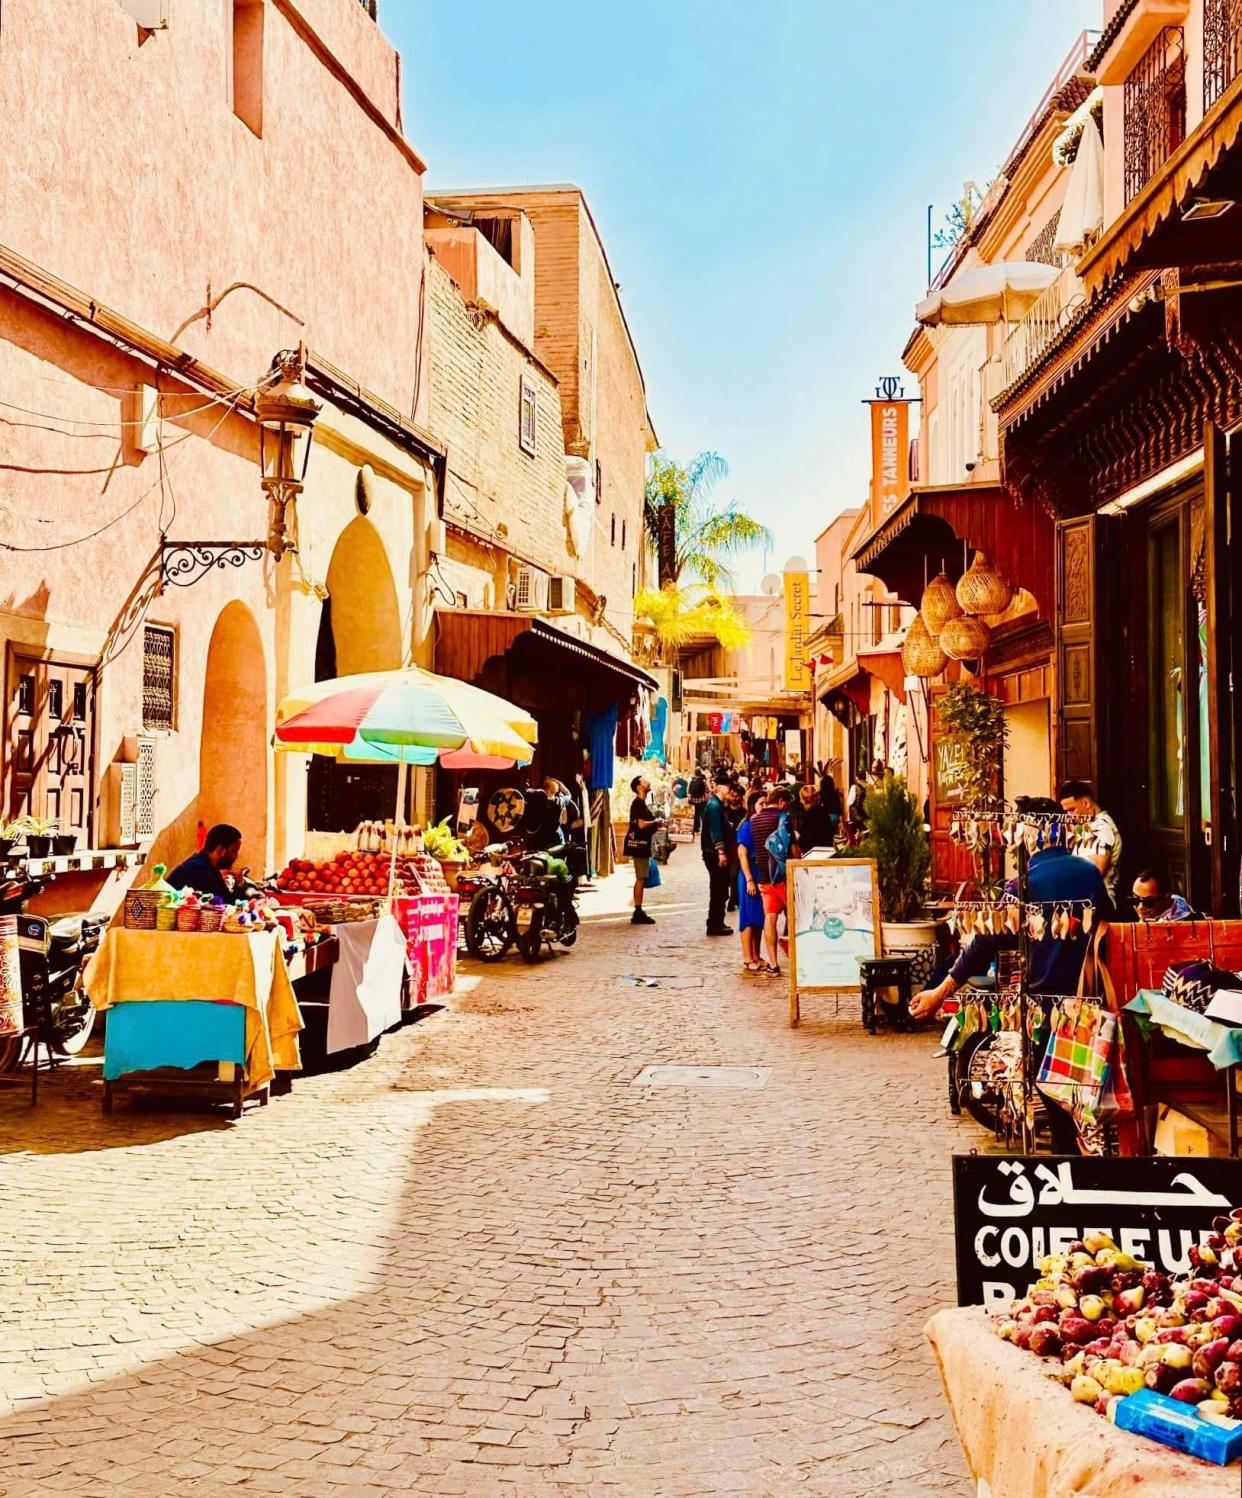 This street is within the busy city center of Marrakesh, a city that has a population of almost a million people. When Patti Zarling visited here, she was thrilled to buy some Moroccan yarn.